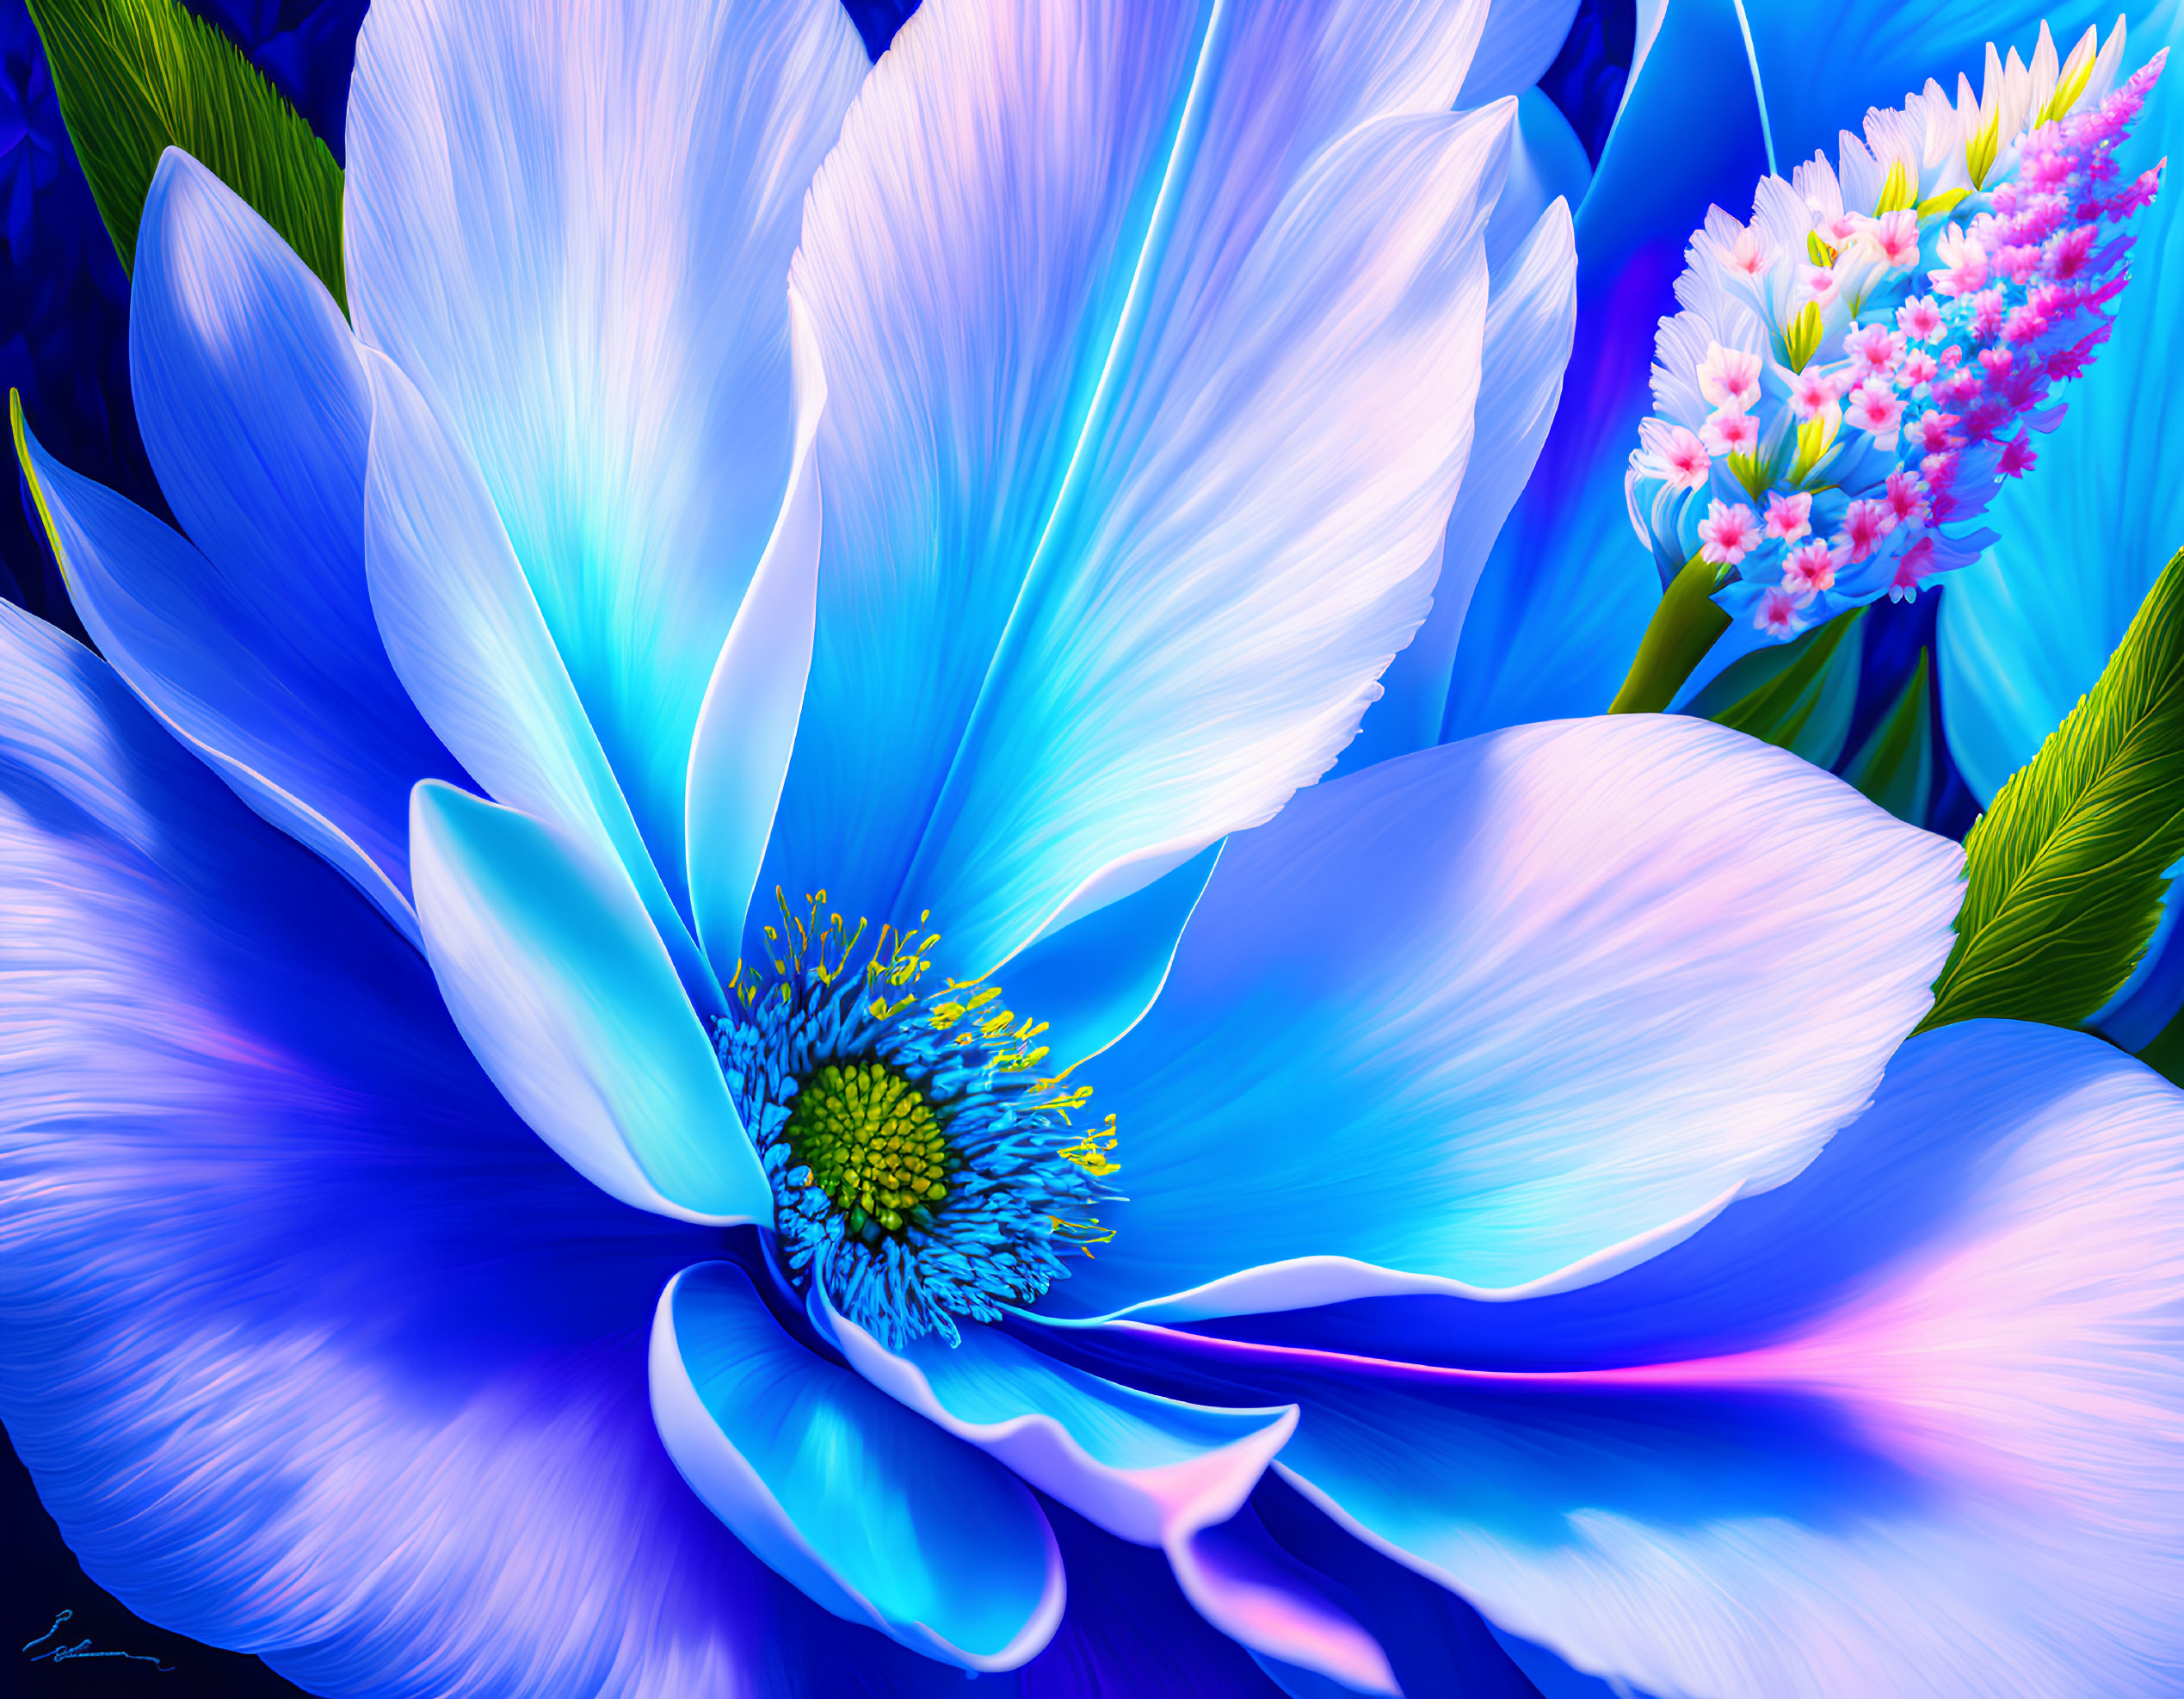 Colorful digital artwork featuring large blue flower with intricate yellow-green center and pink blooms in background